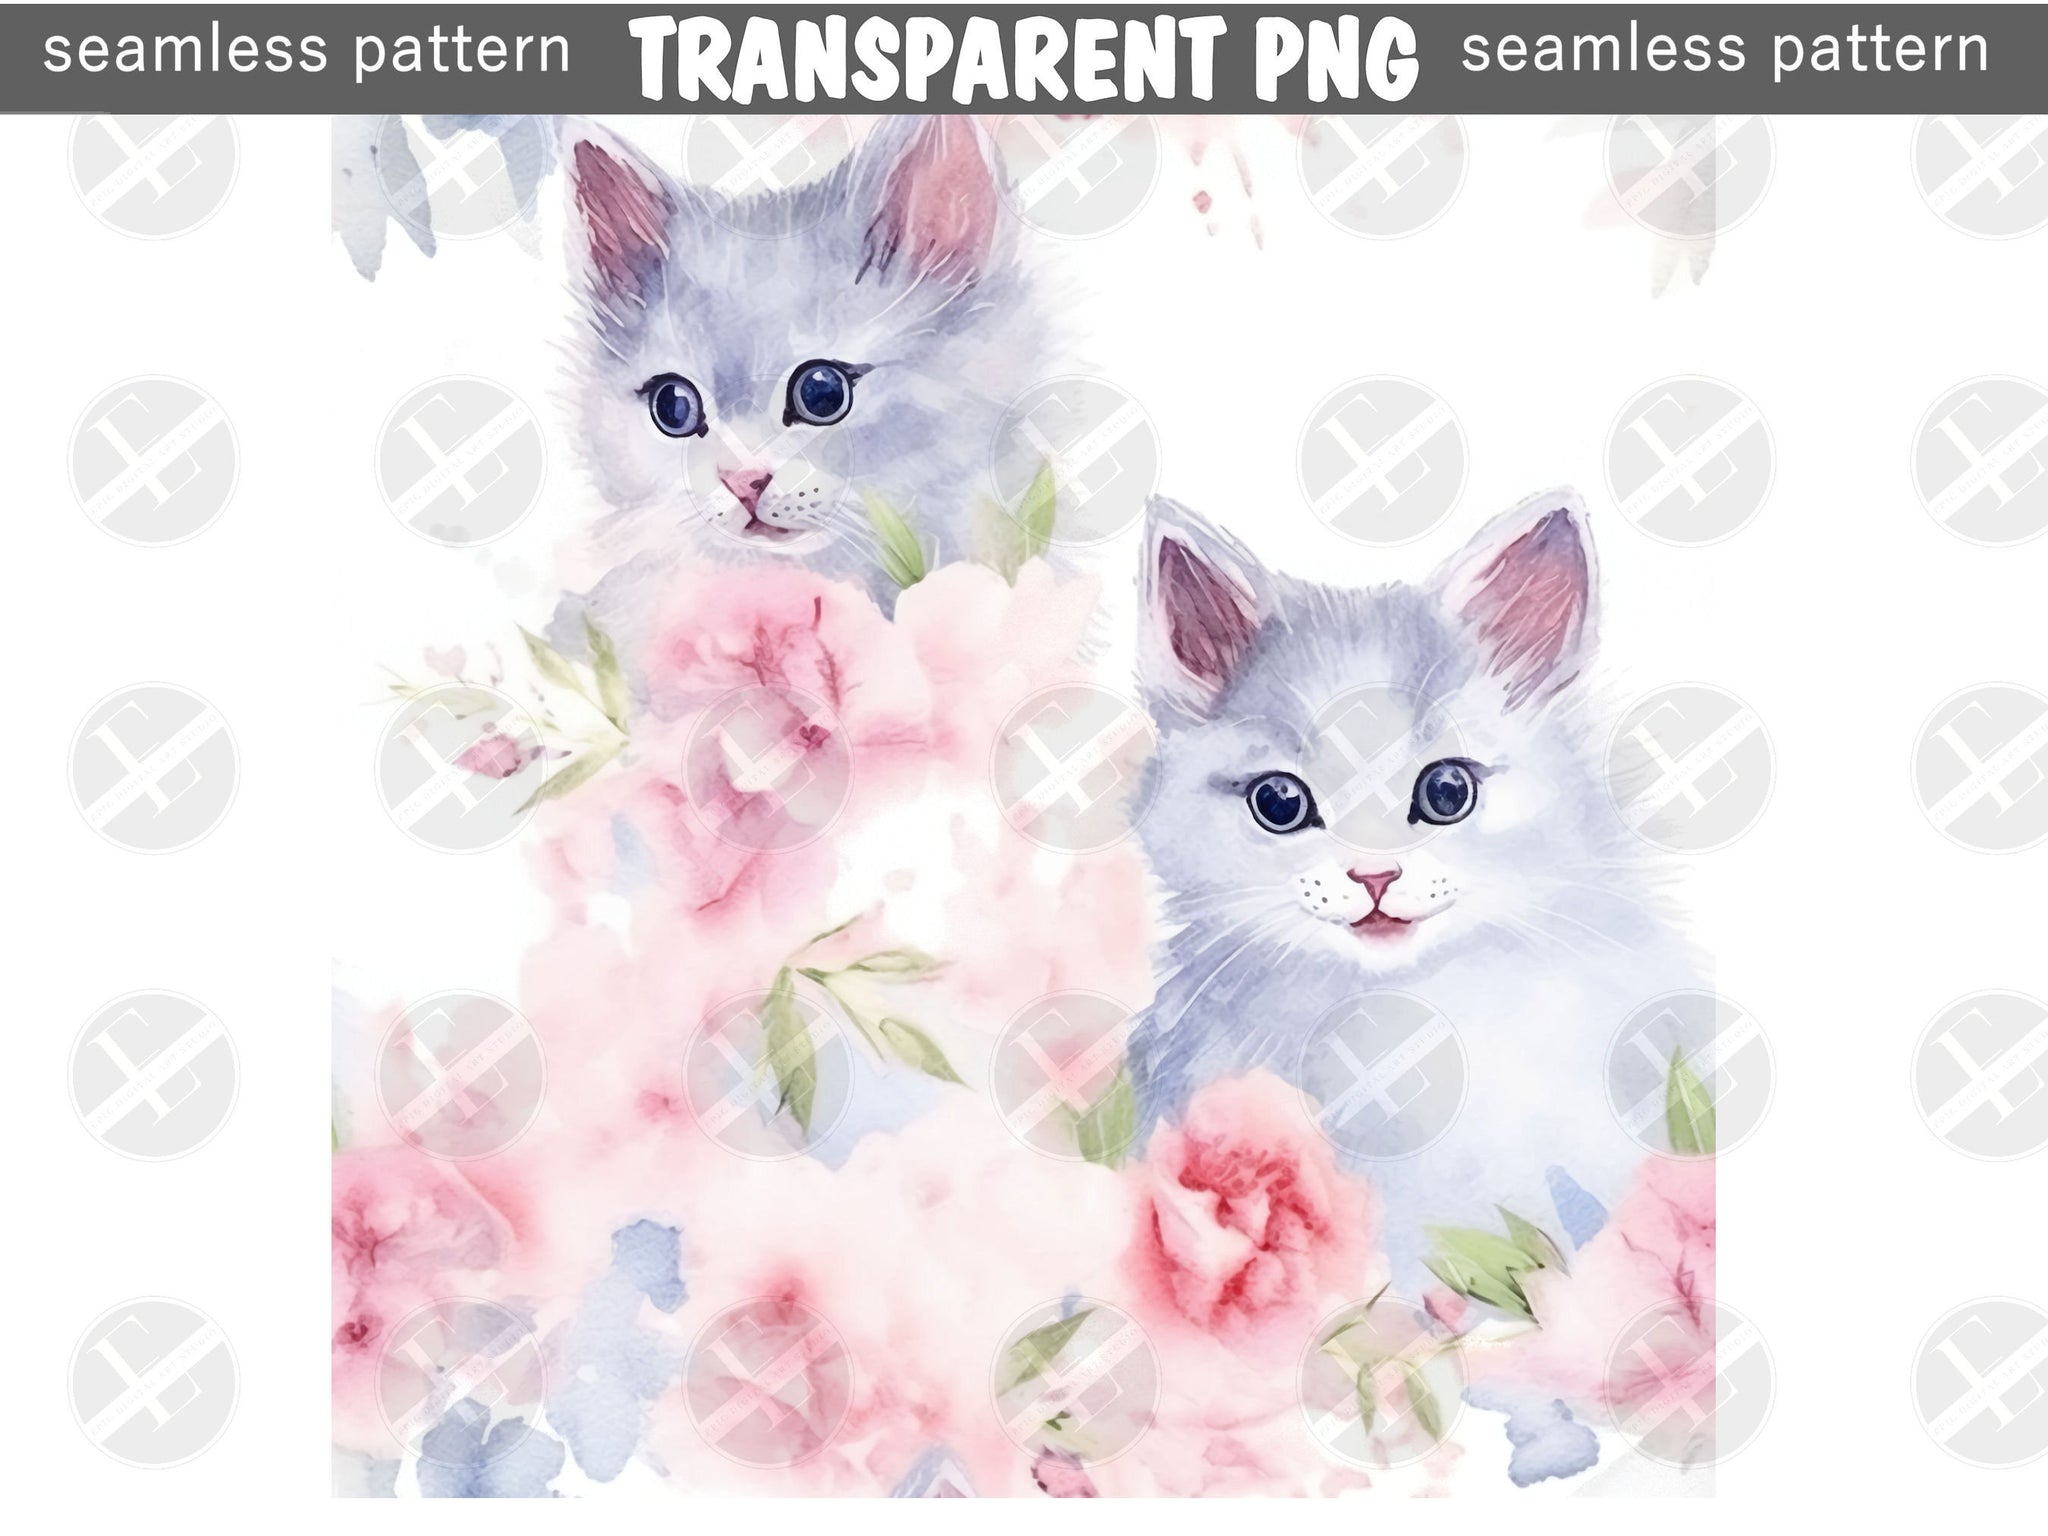 Cat Seamless Patterns Digital Download PNG - Bundle of 10 - Shabby Chic Vintage Soft Watercolor Kittens Patterns - Commercial & Personal Use